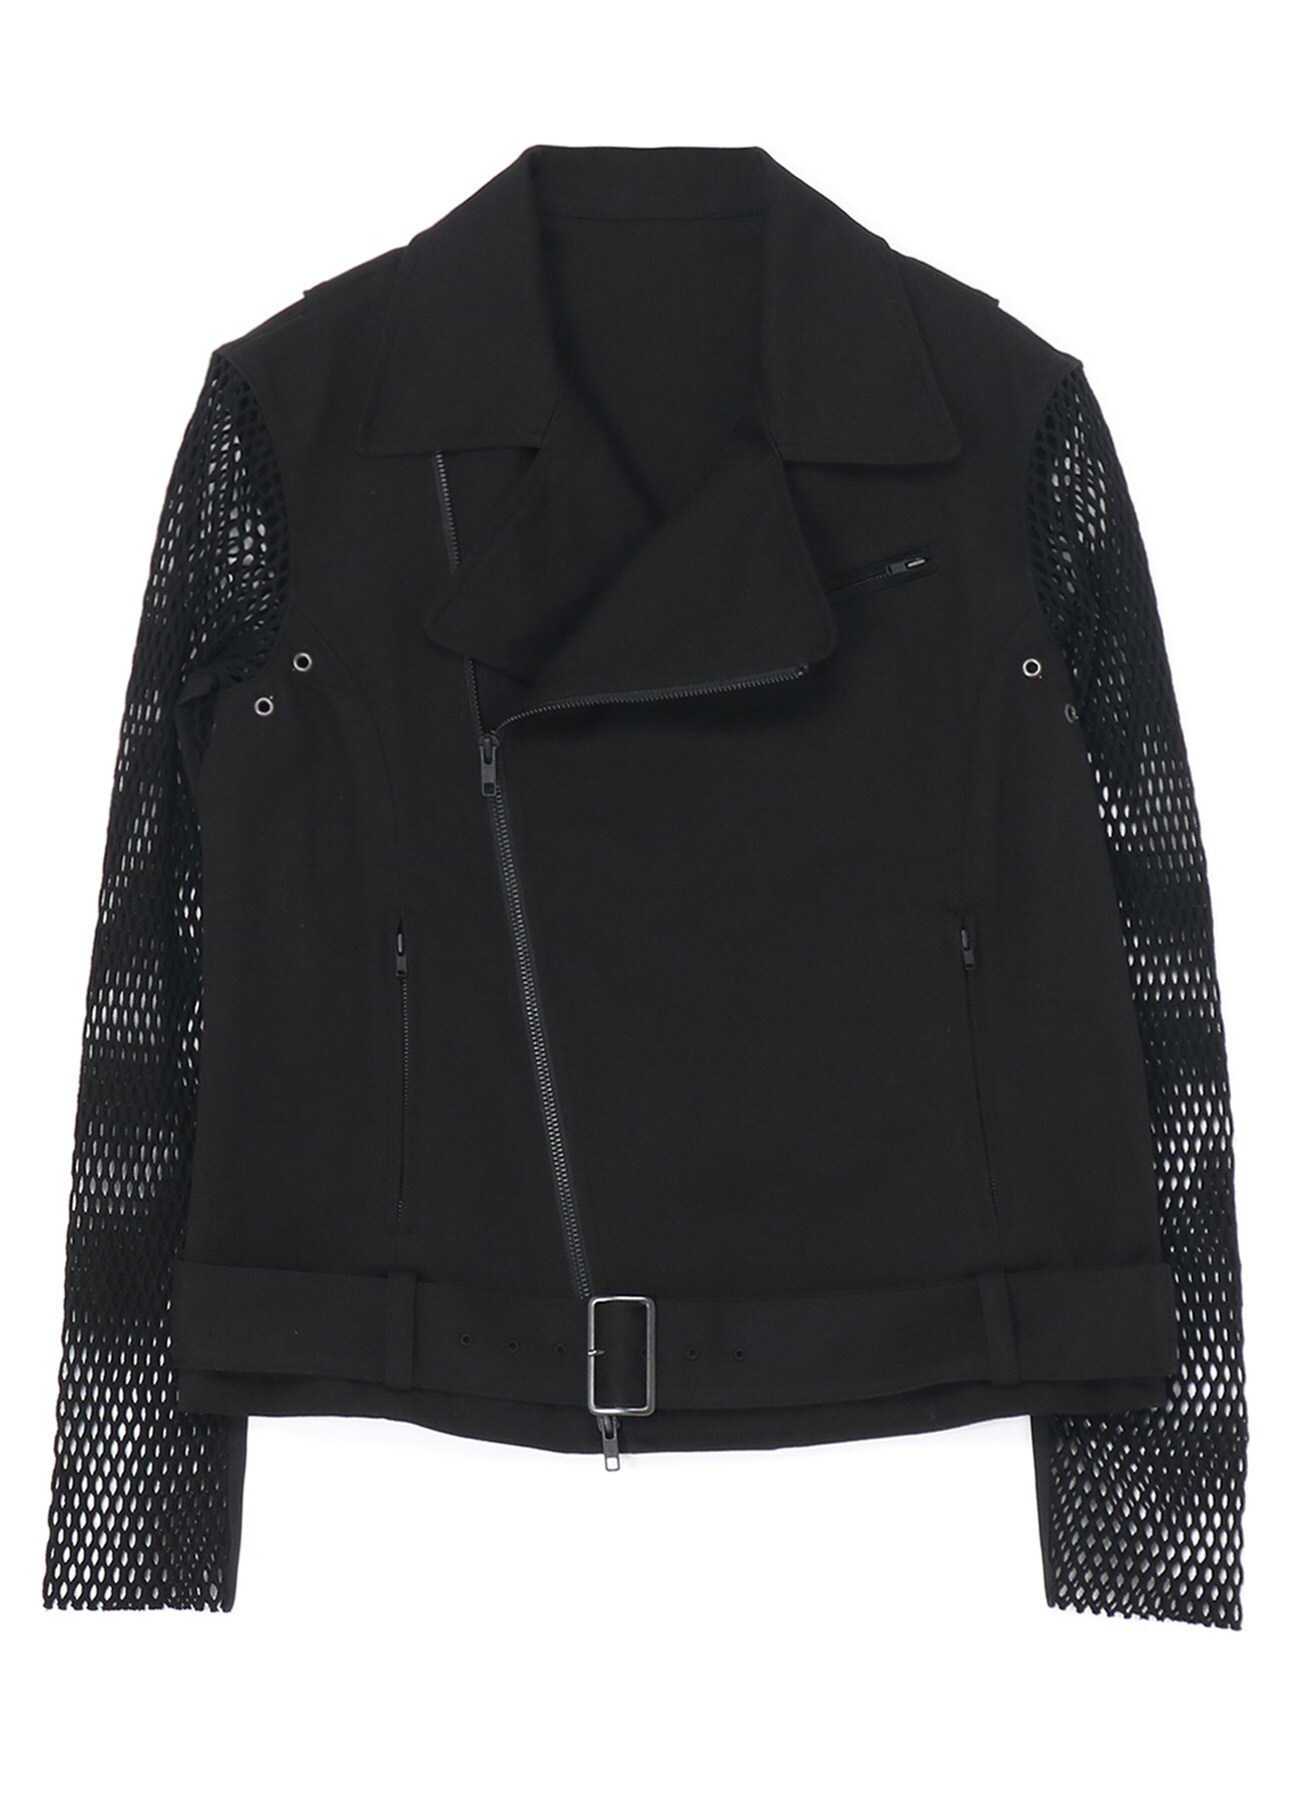 COTTON DRILL BIKER JACKET WITH MESH SLEEVES